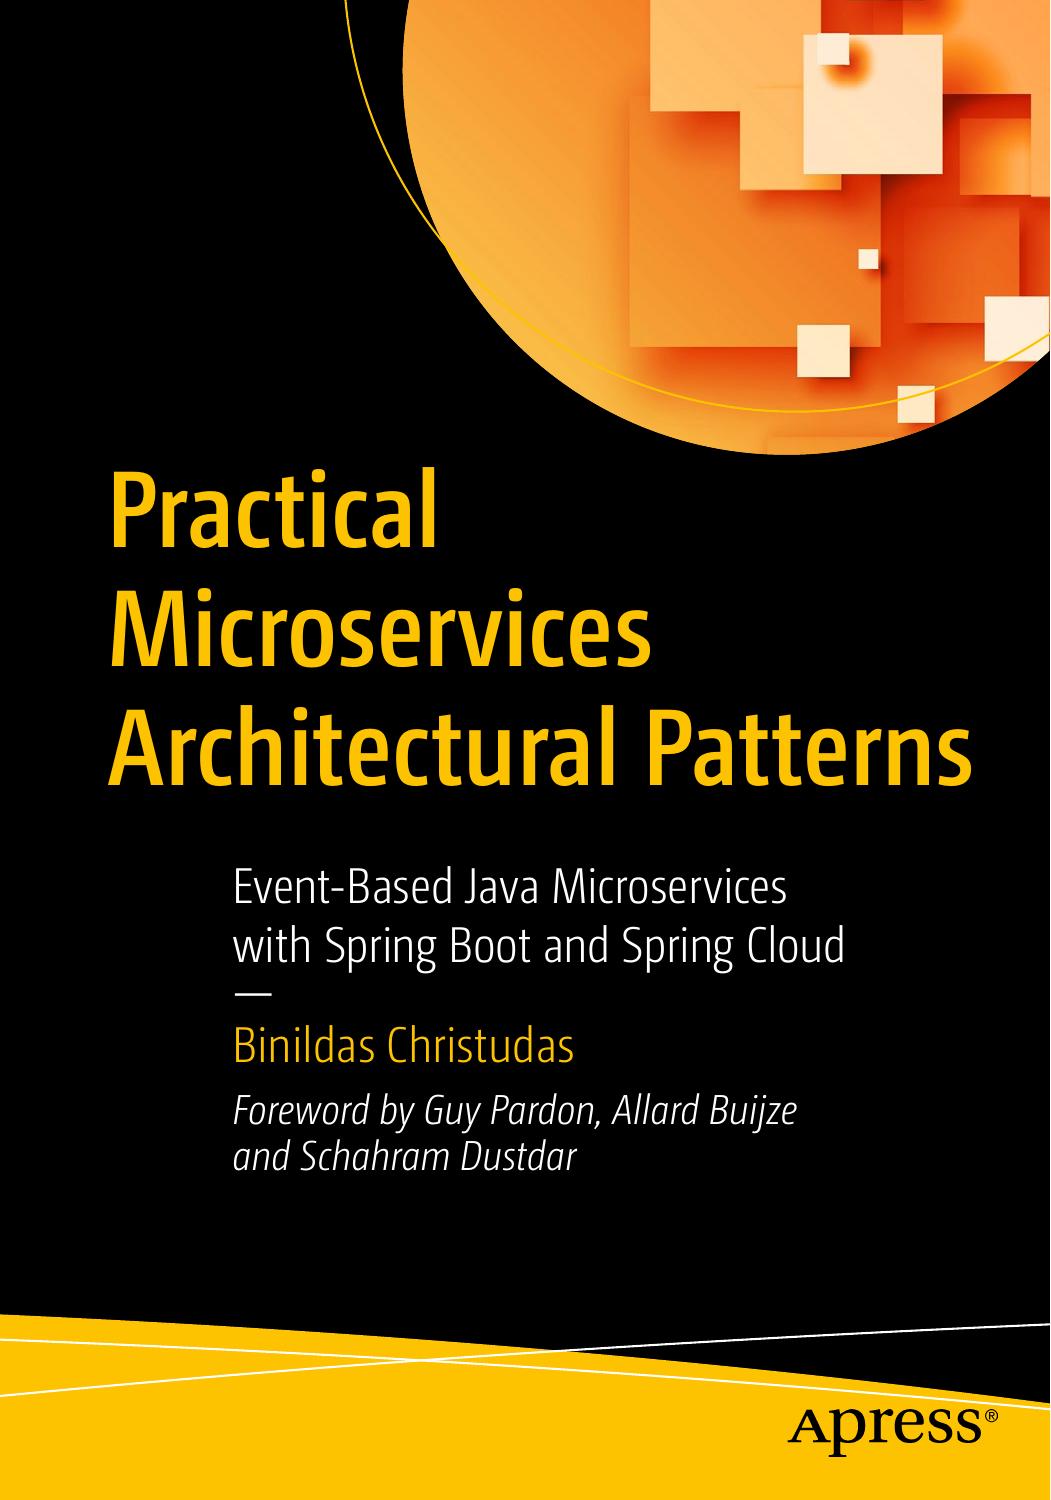 Practical Microservices Architectural Patterns: Event-Based Java Microservices With Spring Boot and Spring Cloud